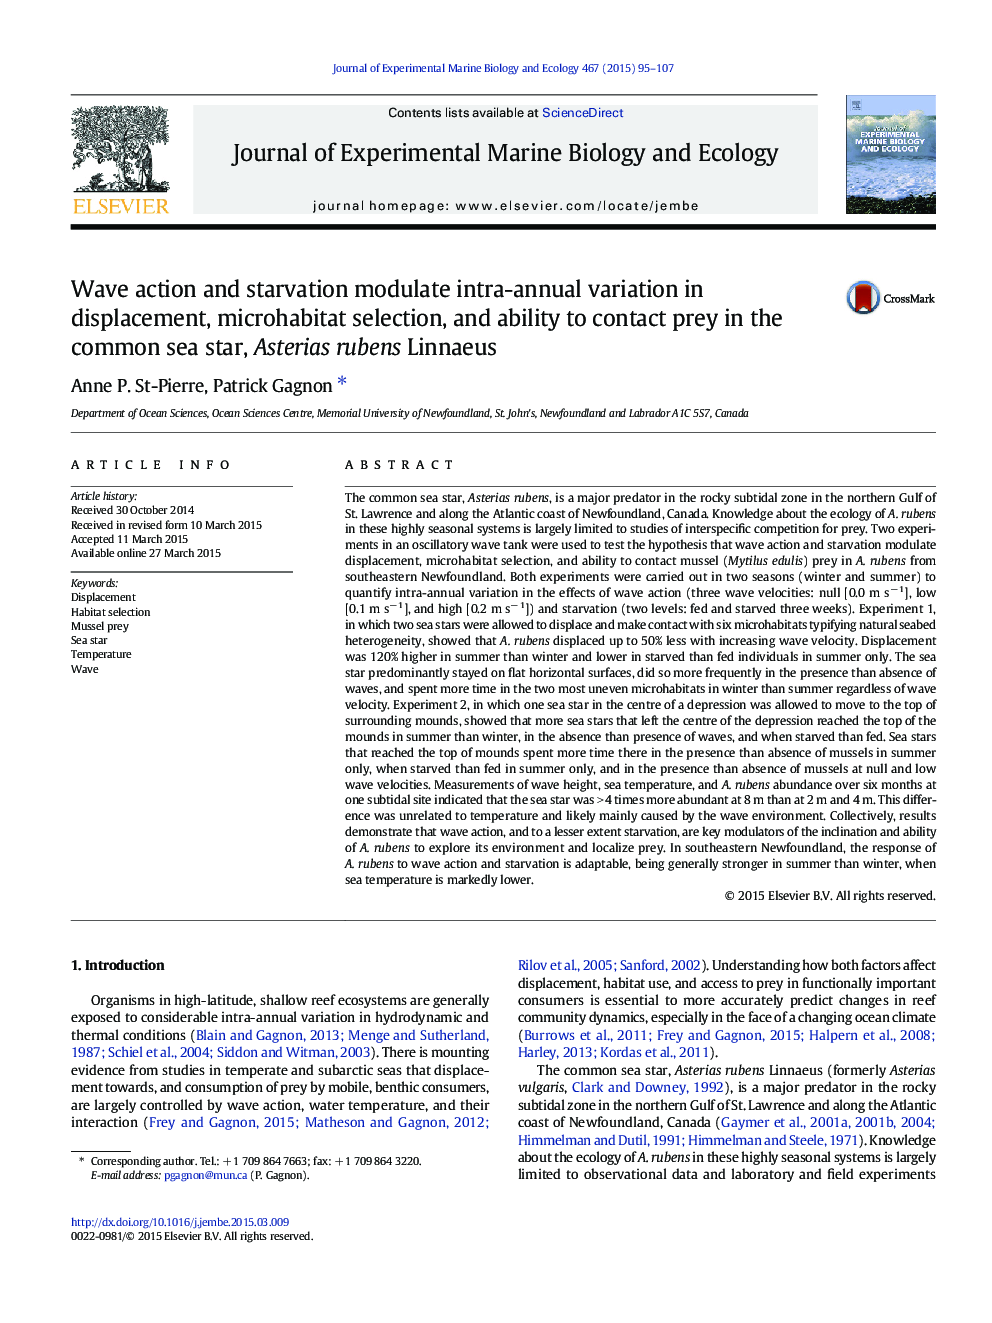 Wave action and starvation modulate intra-annual variation in displacement, microhabitat selection, and ability to contact prey in the common sea star, Asterias rubens Linnaeus